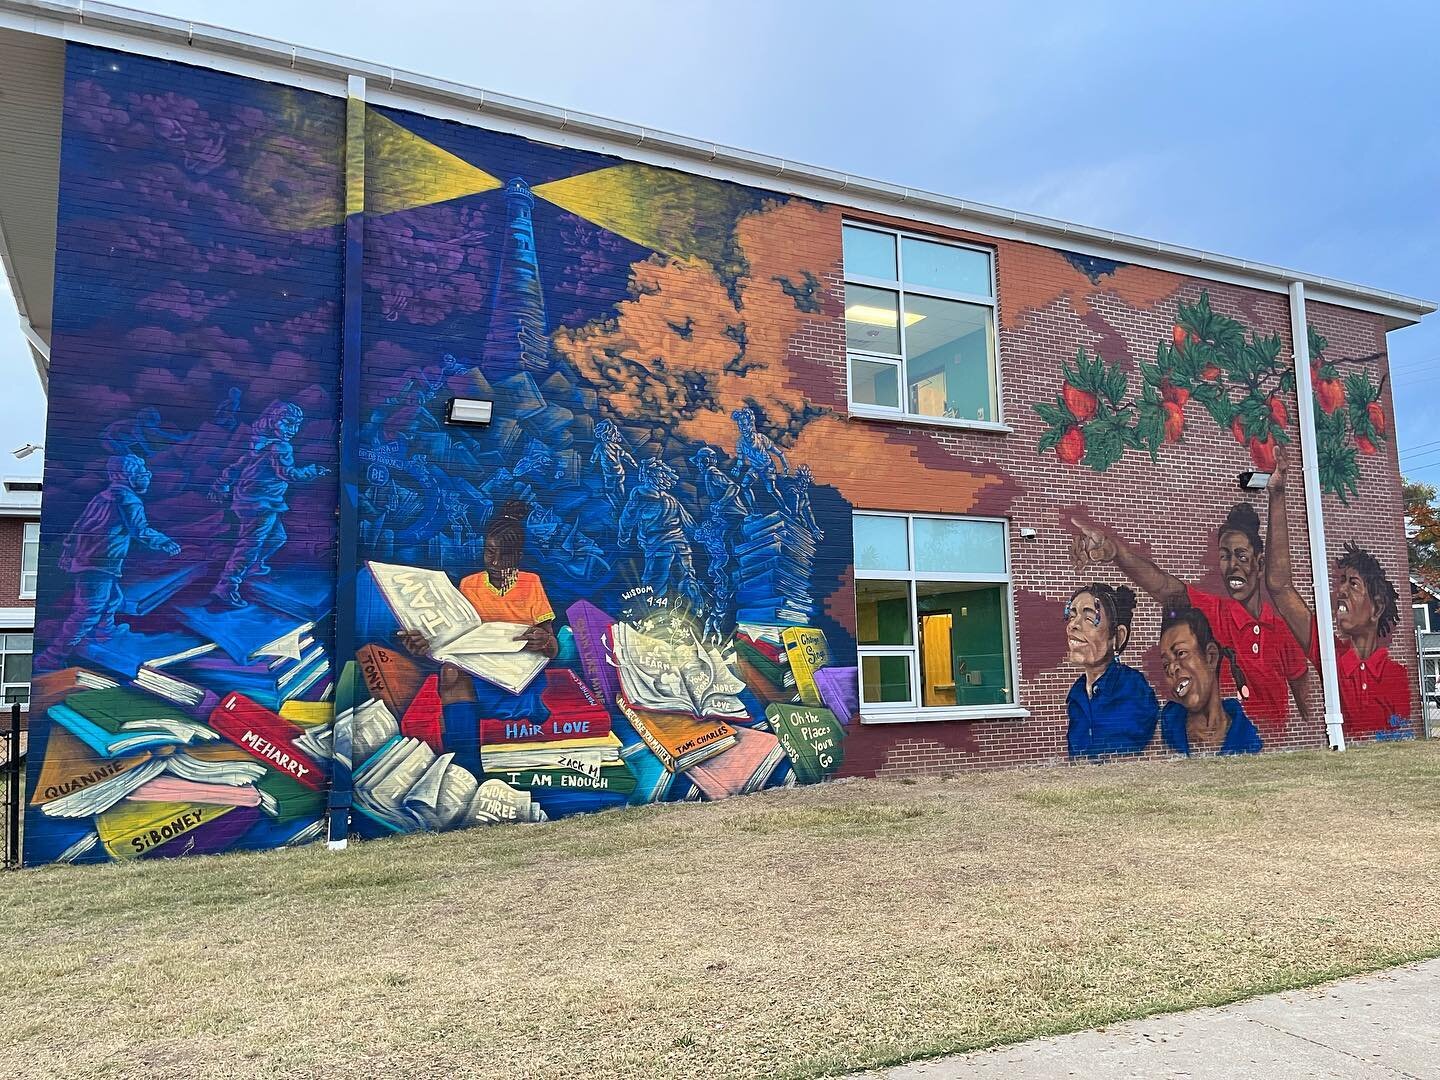 &ldquo;Lighthouse of Education&rdquo;

I forgot to post this mural that I completed at @robertchurchwell_mnps 

Looking forward to what&rsquo;s coming next. Reach out if you&rsquo;d like to connect with us at @liberatedgrounds 

✌🏾

#woke3 #liberate